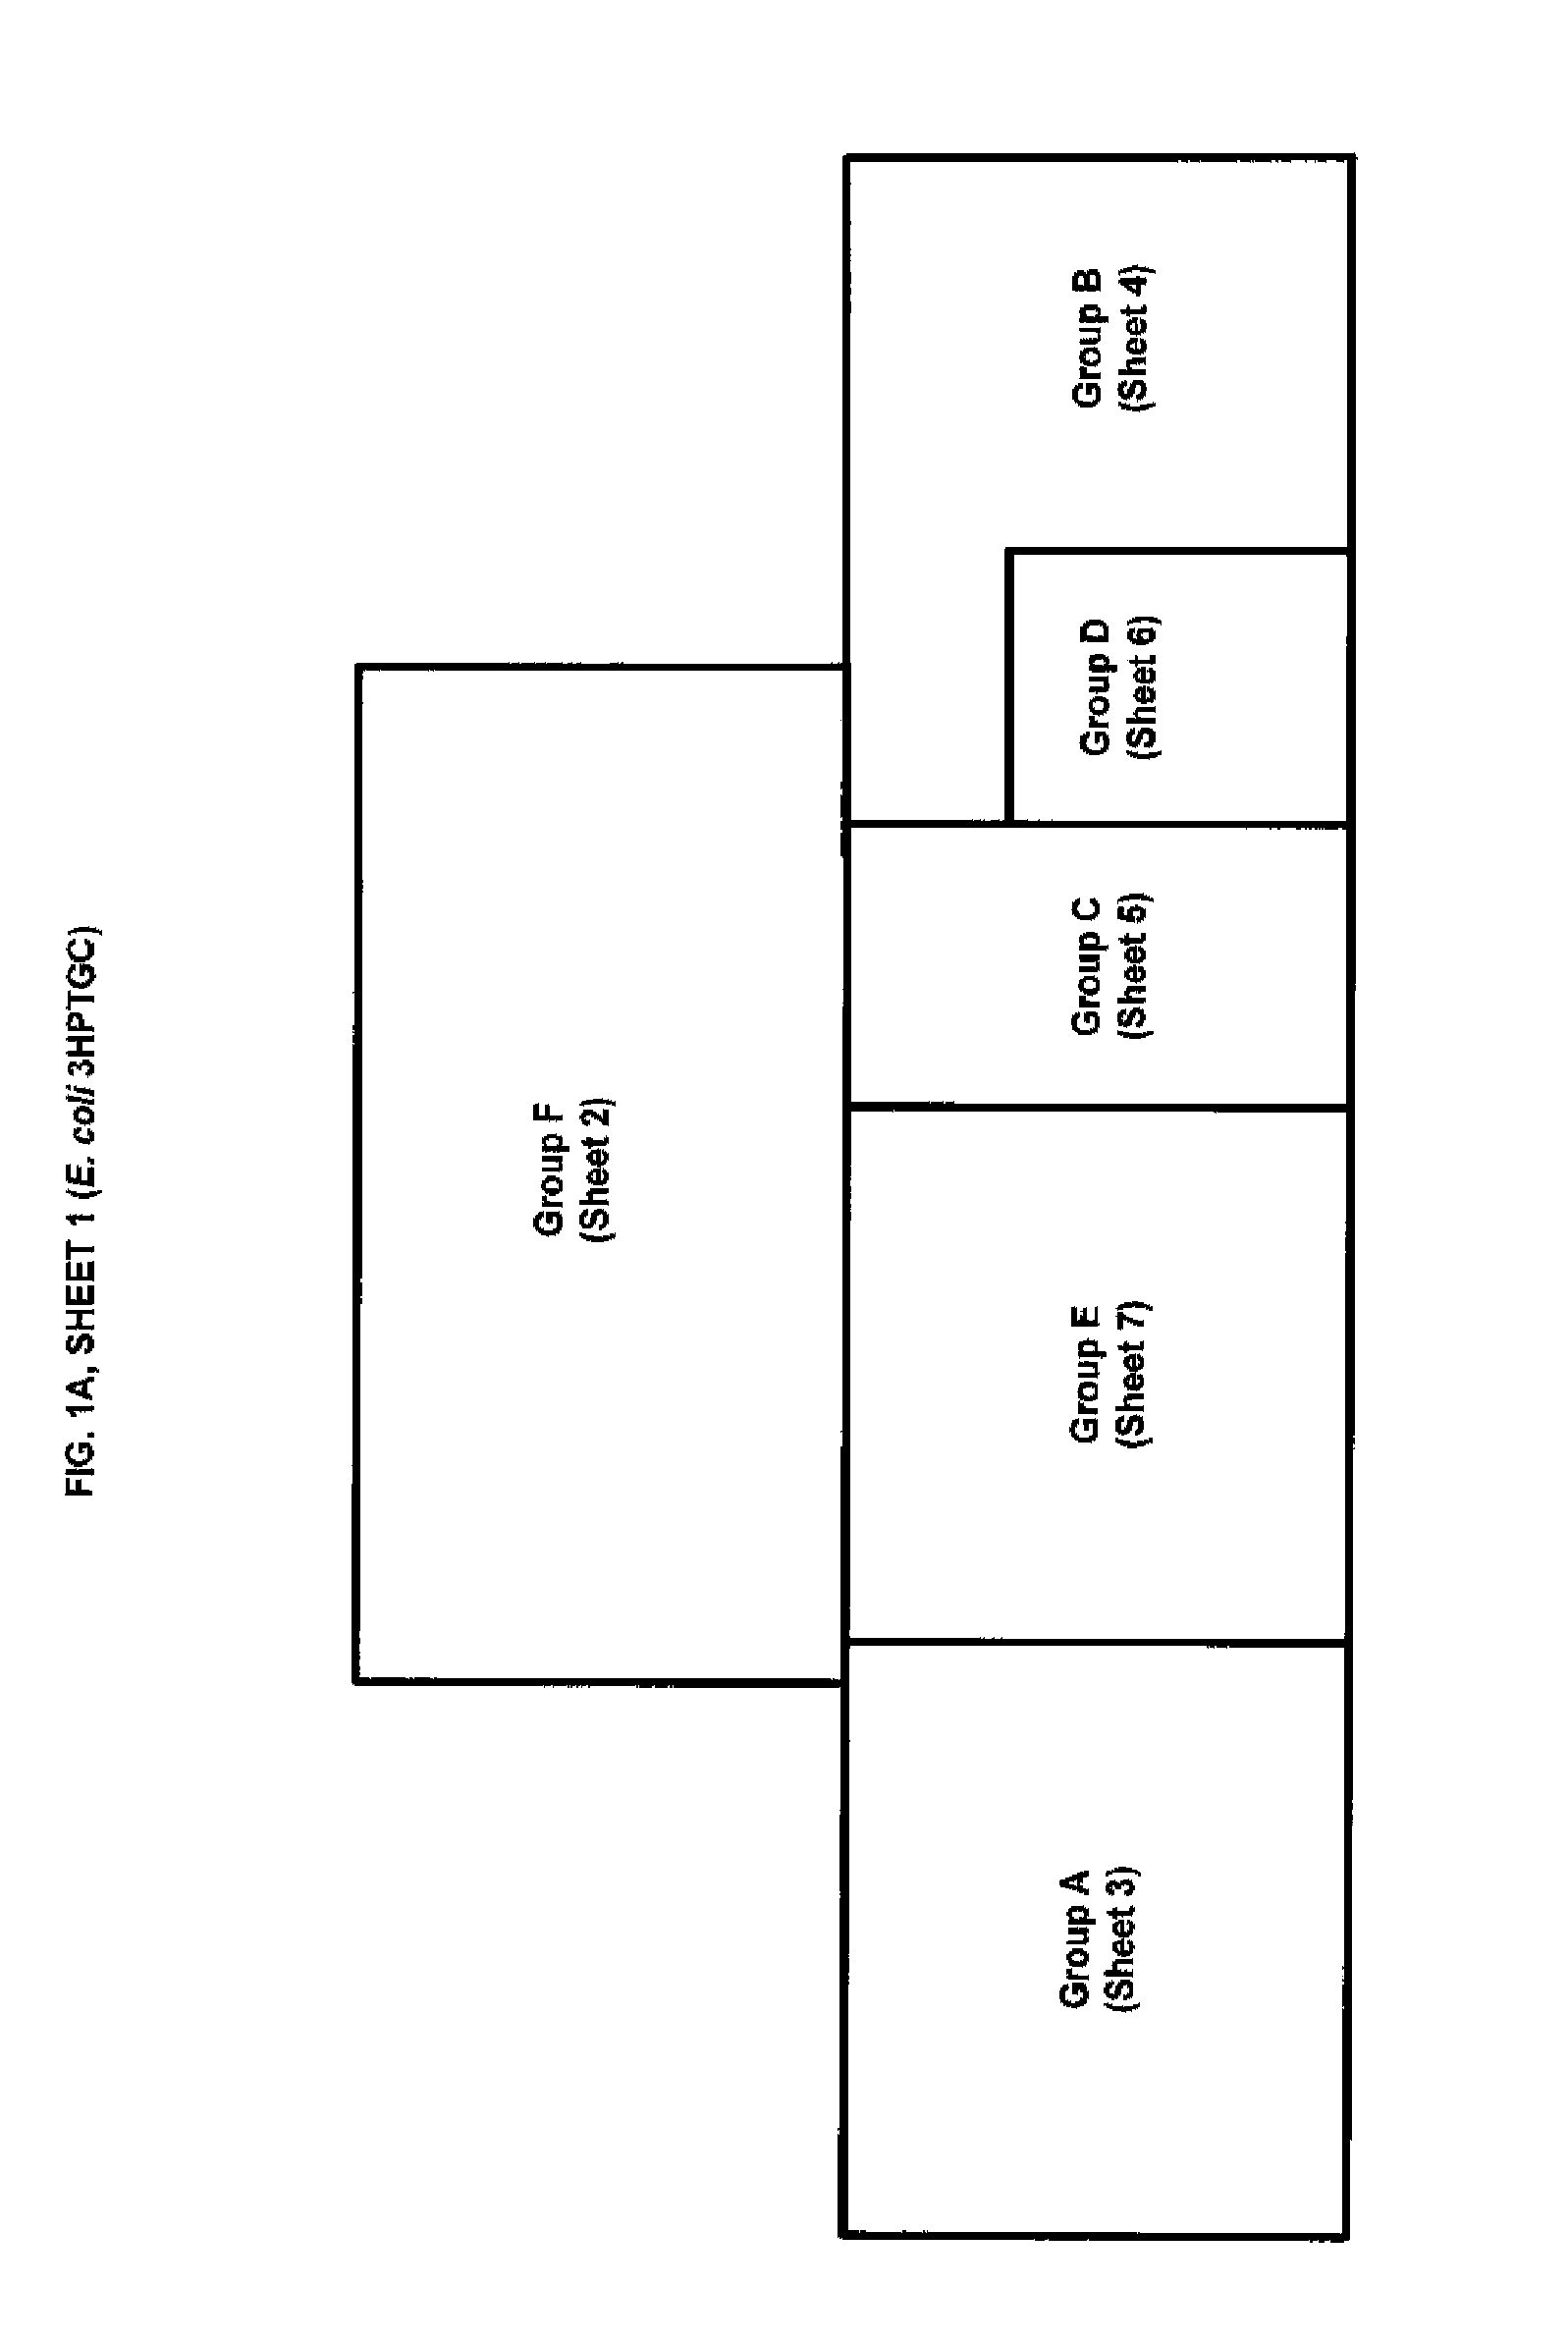 Methods, Systems and Compositions for Increased Microorganism Tolerance to and Production of 3-Hydroxypropionic Acid (3-HP)